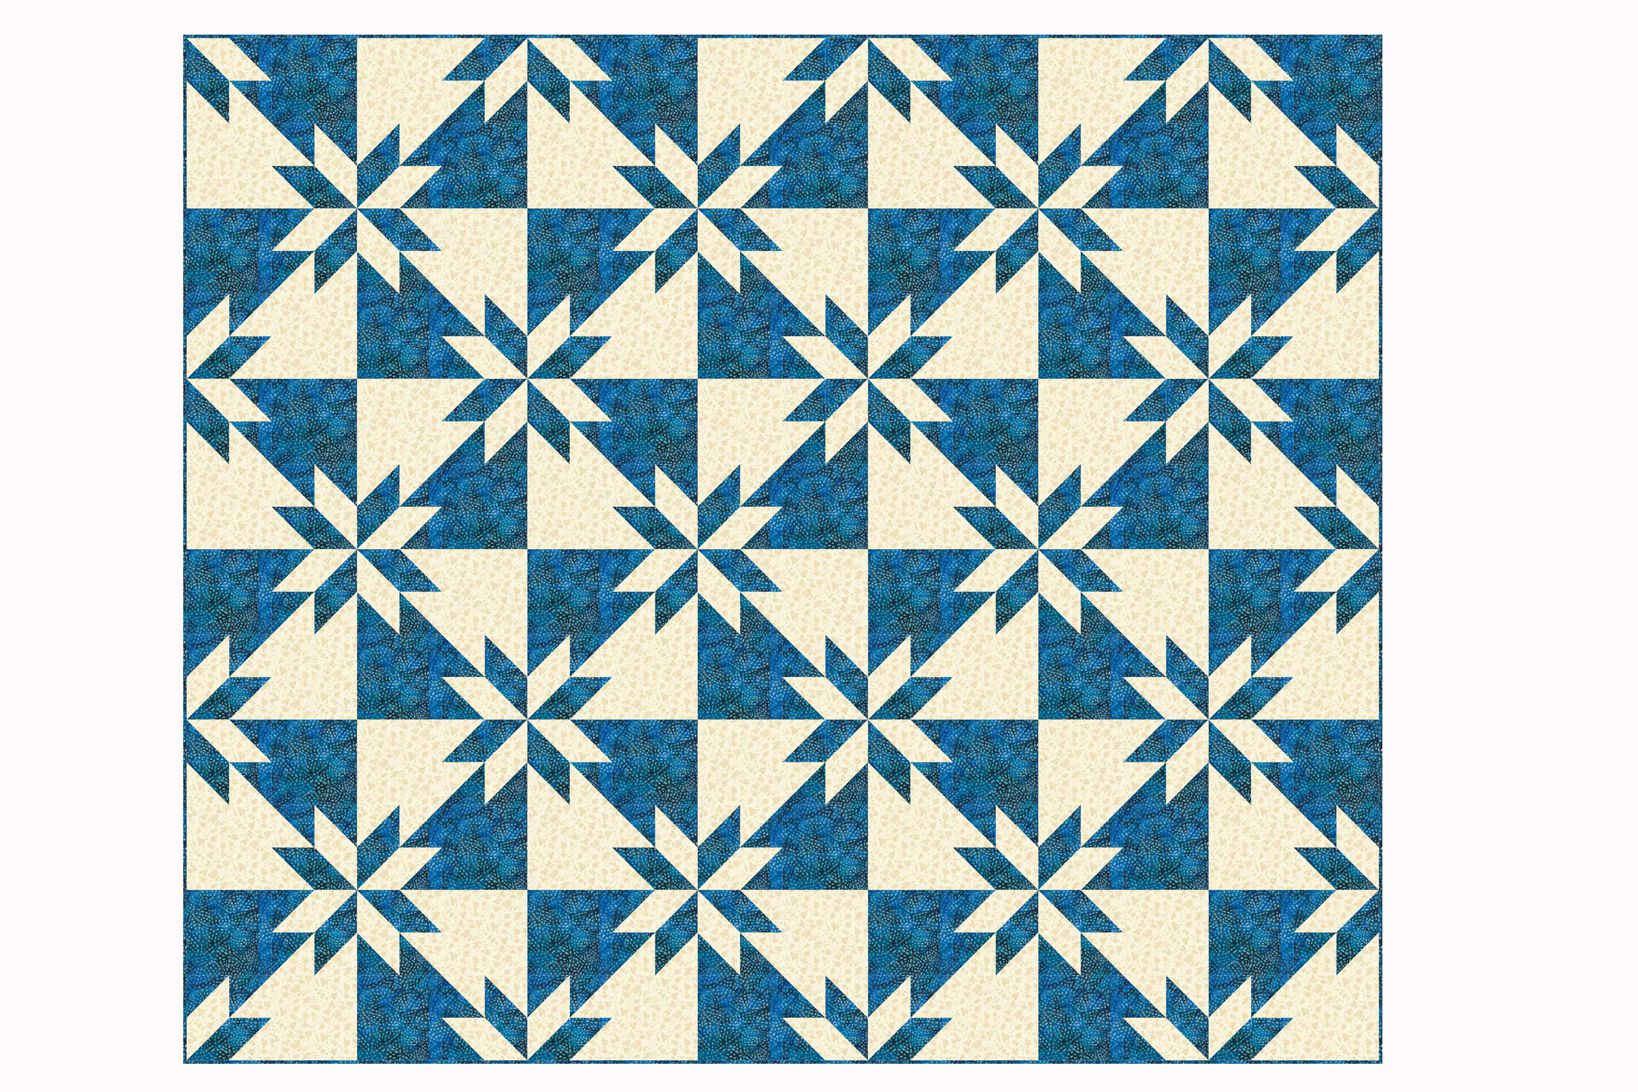 Free Printable Quilt Block Patterns For Beginners